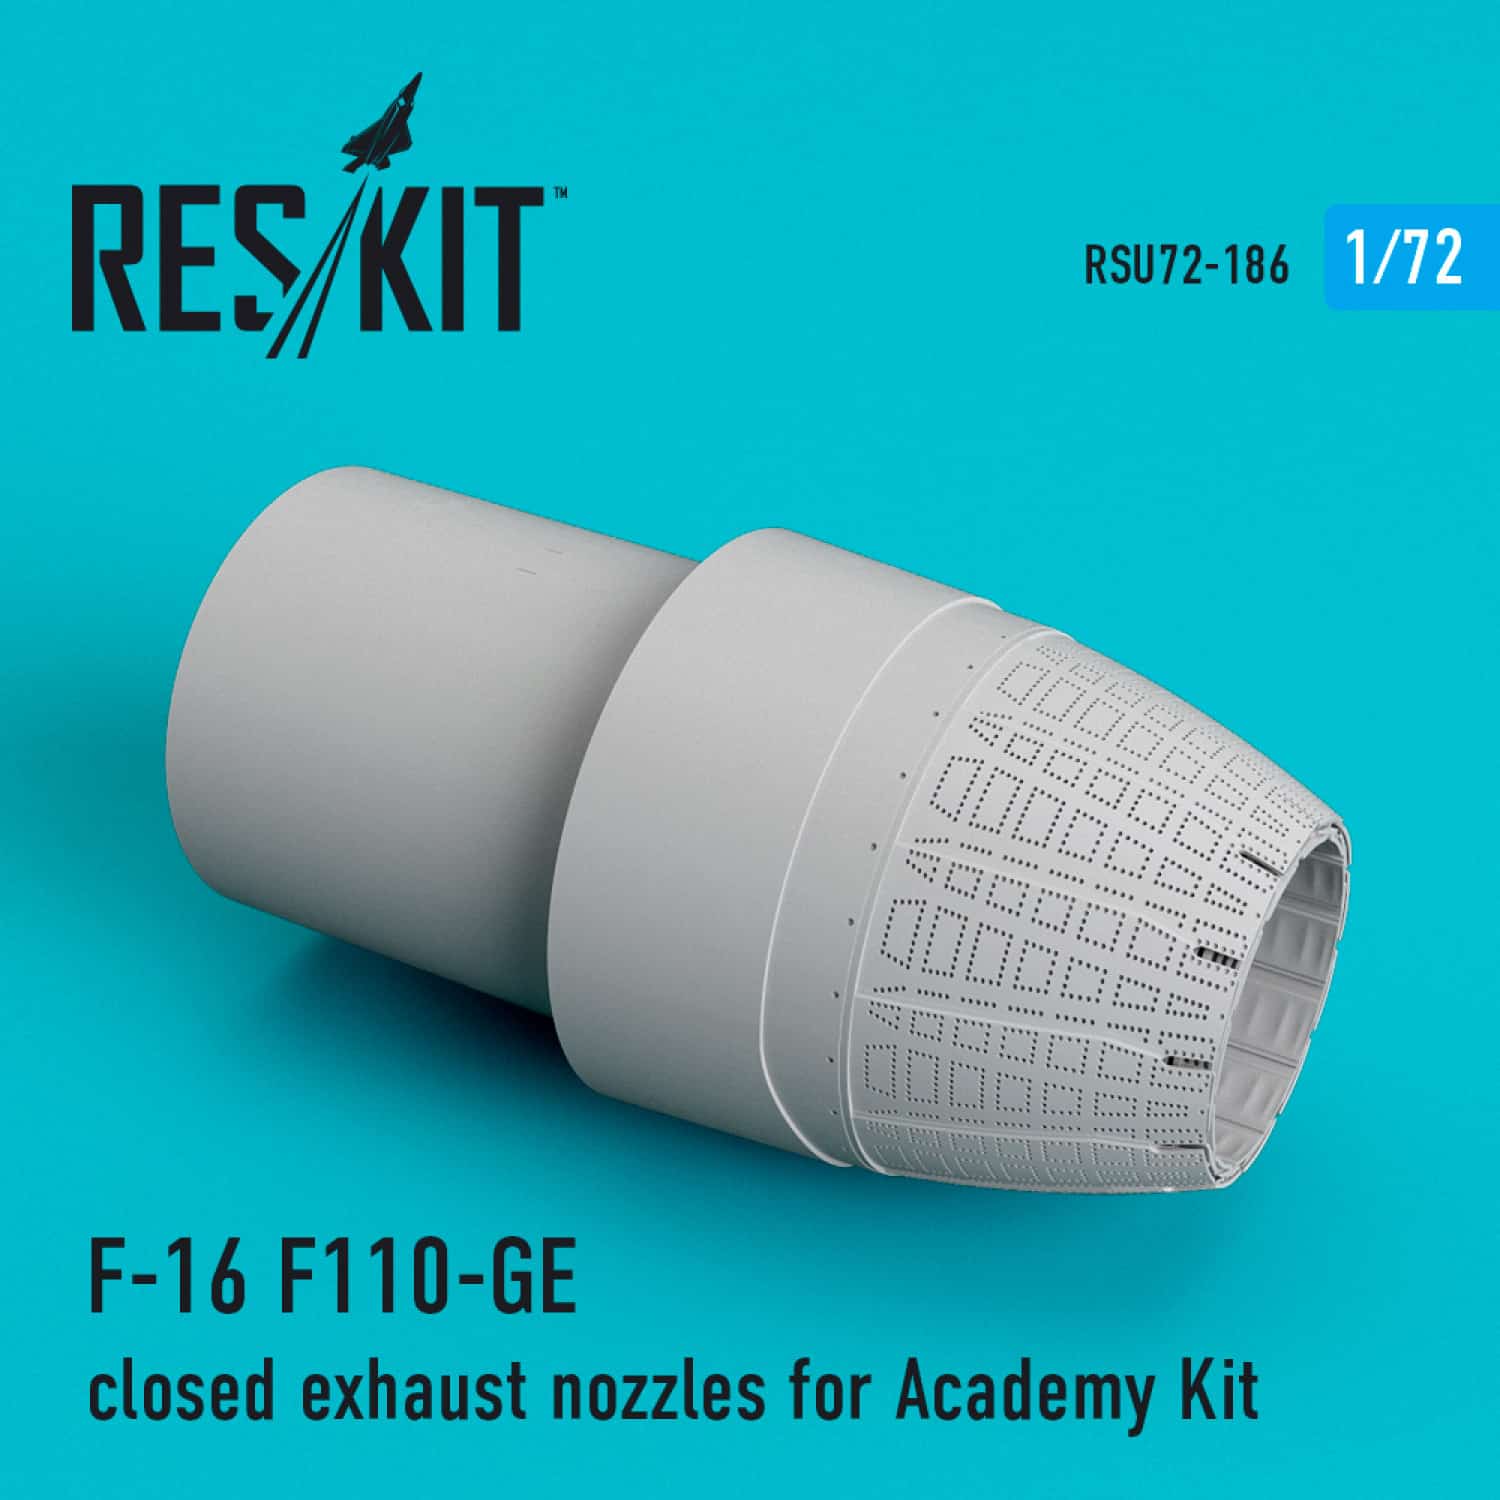 Reskit 172 F-16 F110-GE close exhaust nozzles for Academy Kit